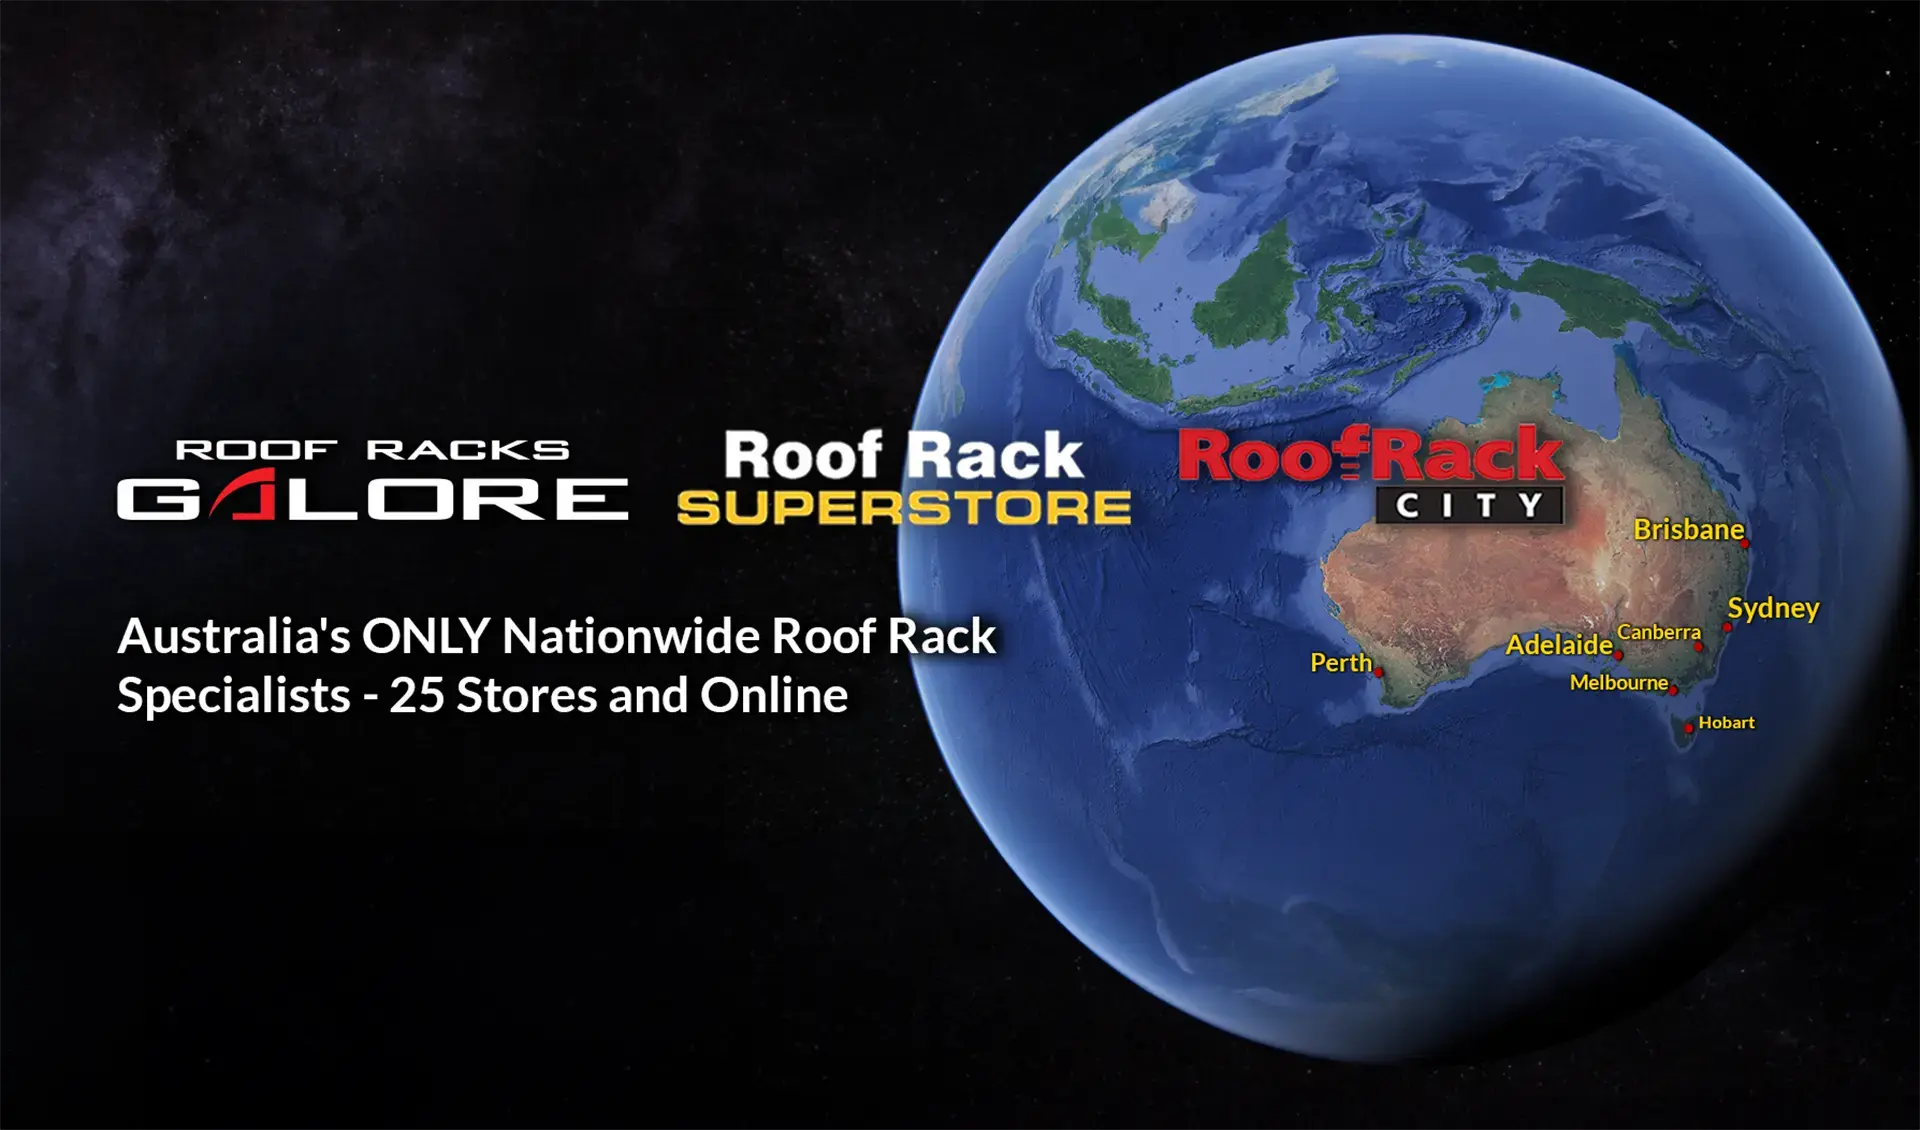 Australia's Nationwide Roof Rack Specialists